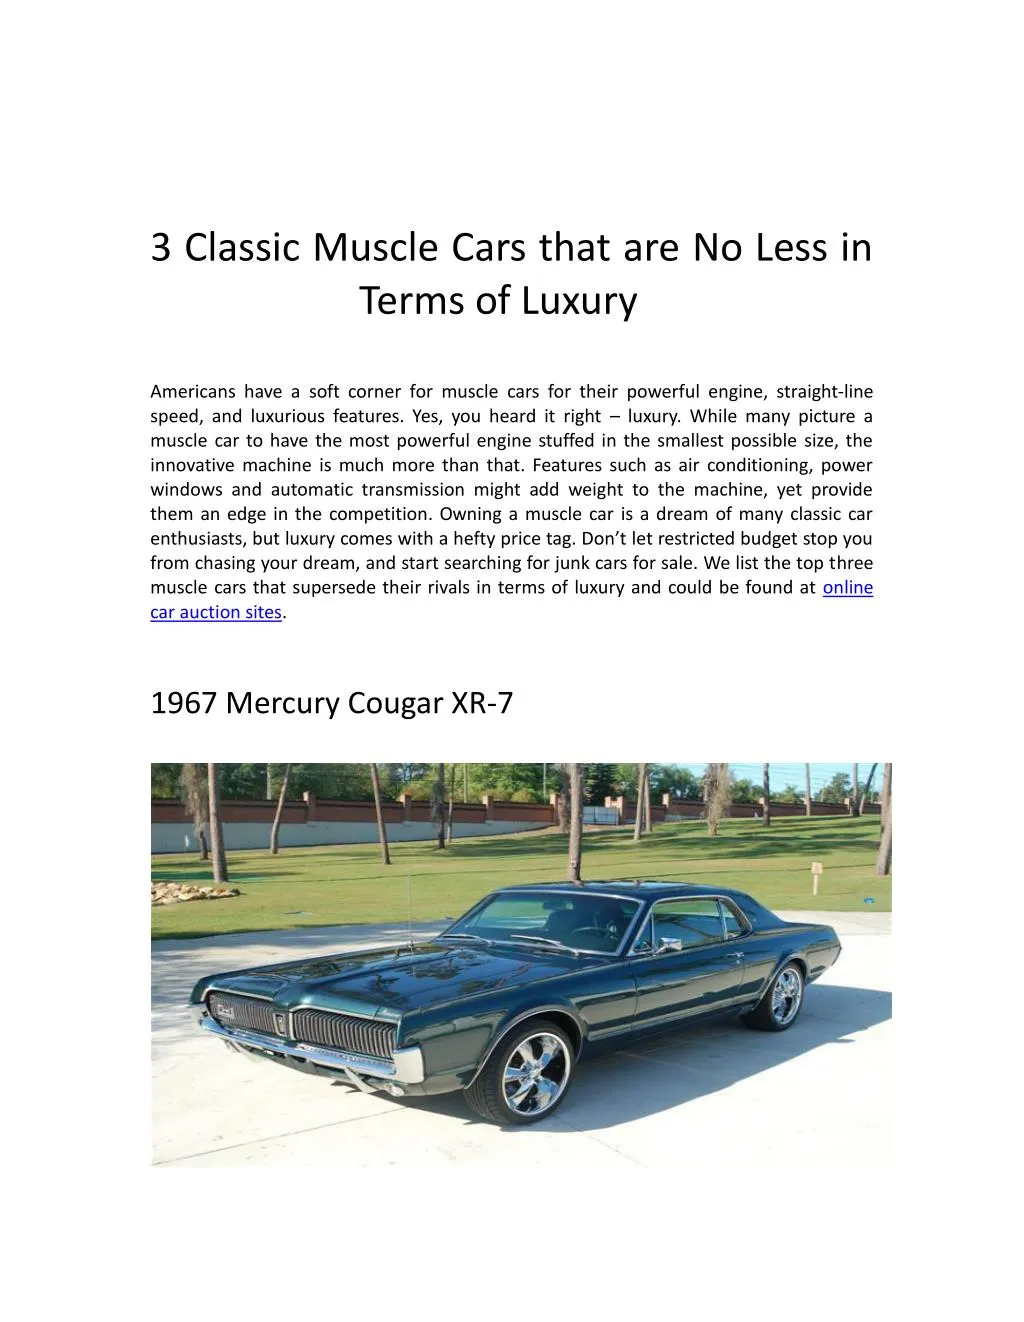 3 classic muscle cars that are no less in terms